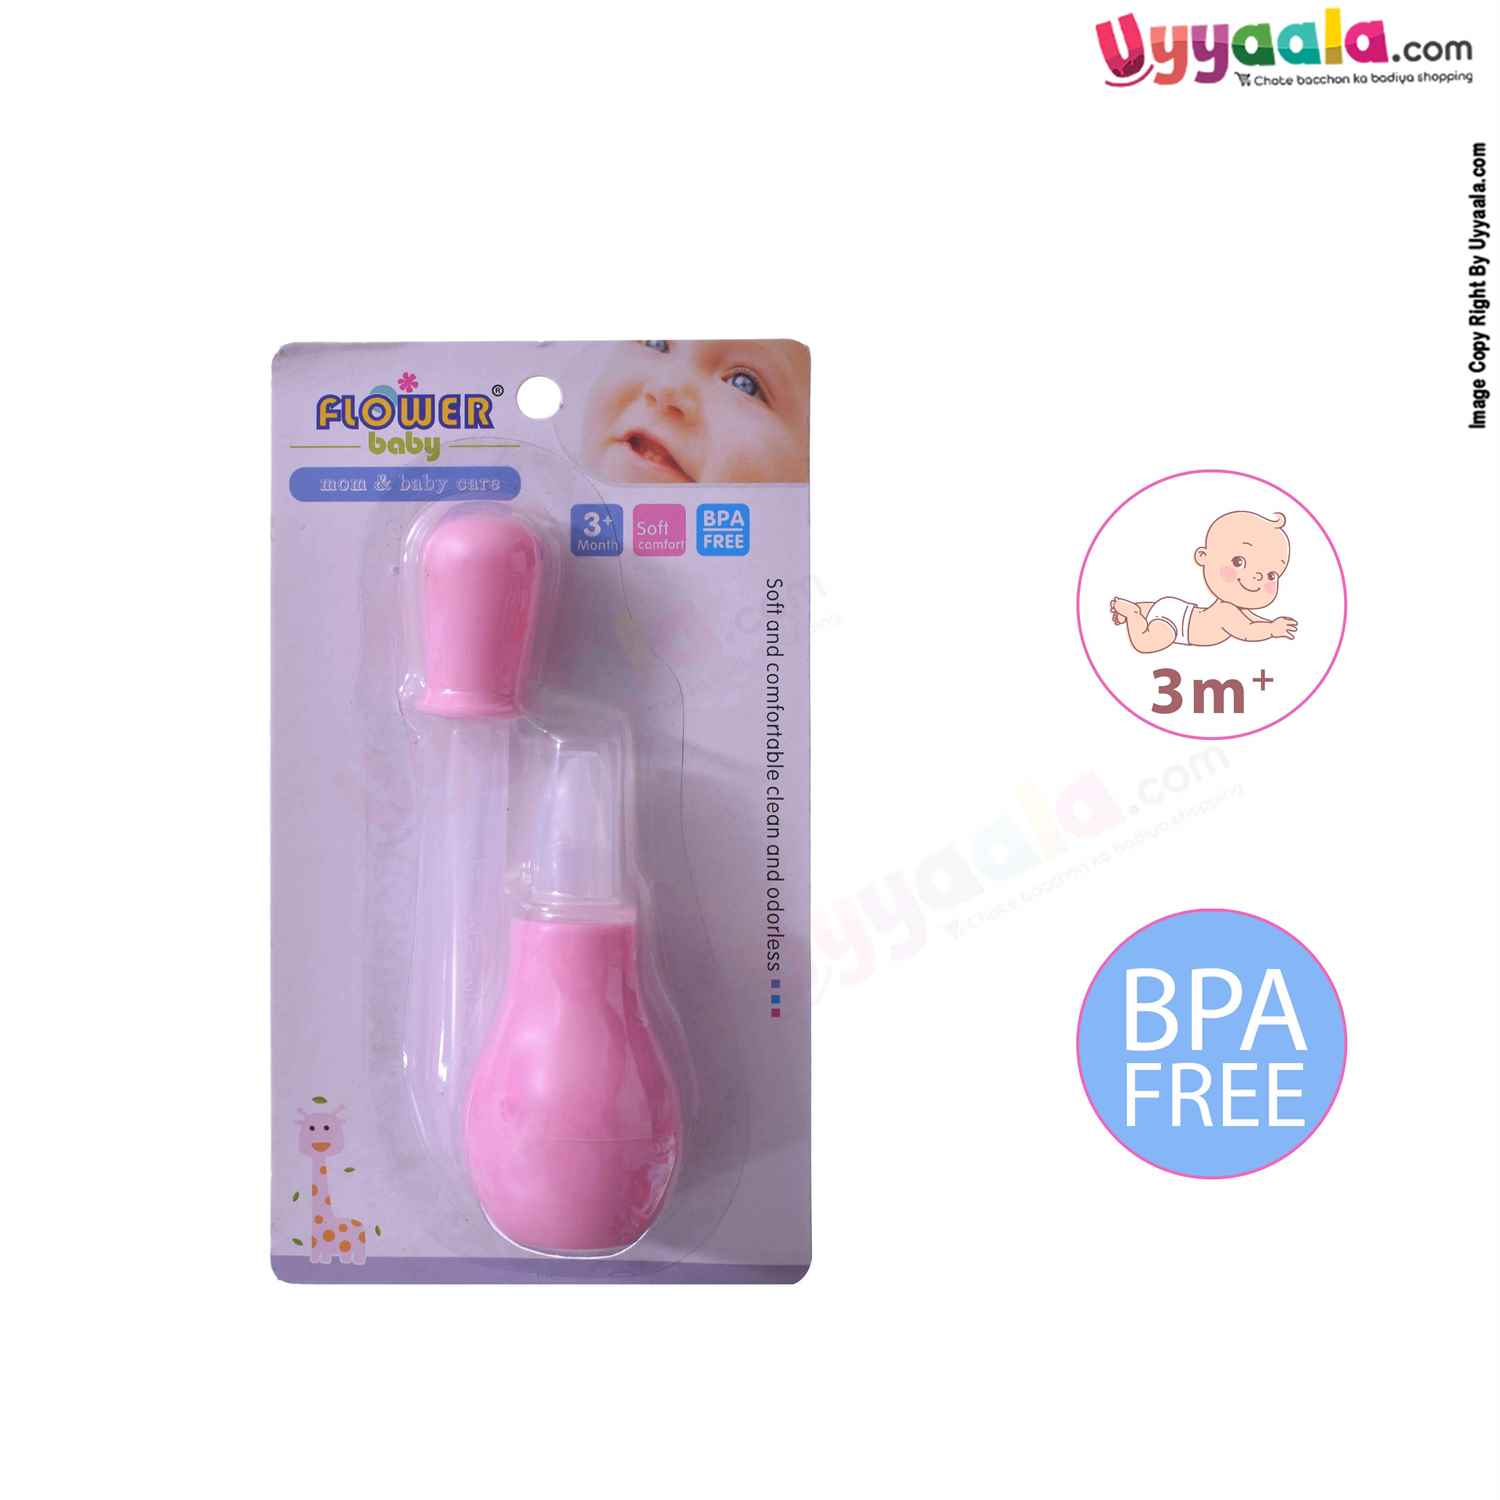 Flower Baby Mom & Baby Care Medicine dropper 3m+age, Pink